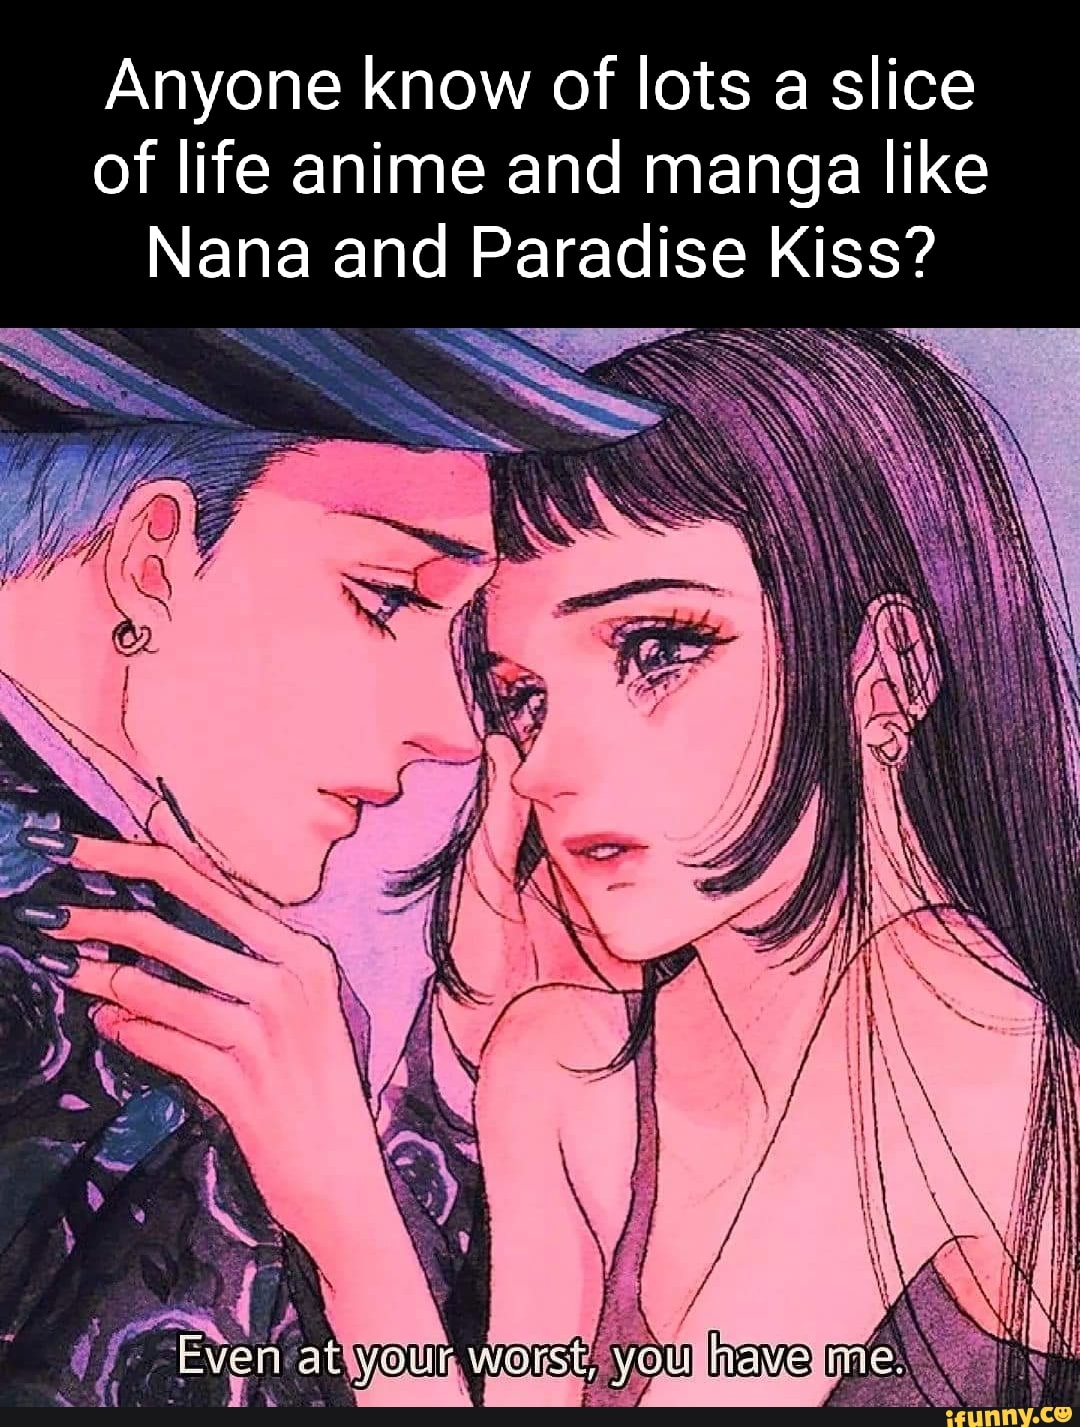 Anyone know of lots a slice of life anime and manga like Nana and Paradise  Kiss? SS ryer ab YOUT WOFSl YOU Cave mie, 